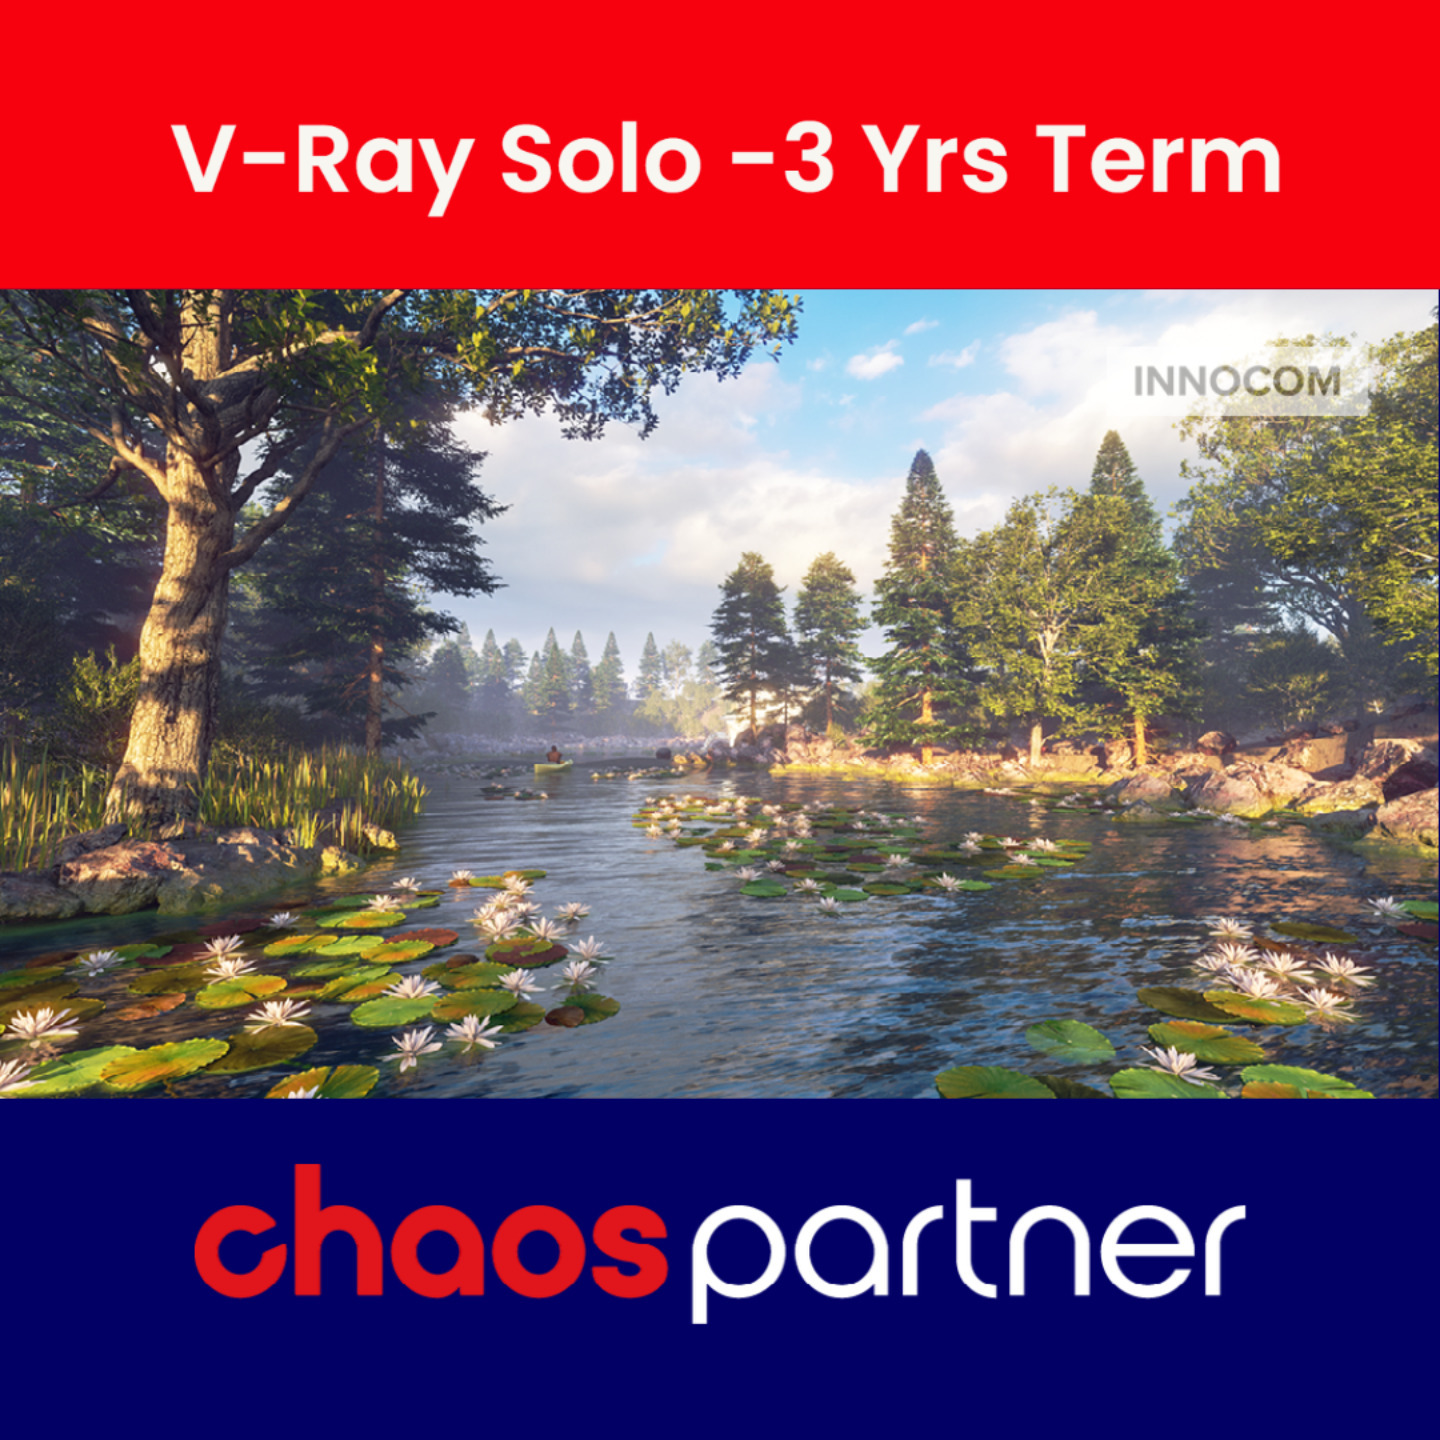 V-Ray Solo- Annual (3 Years Term)